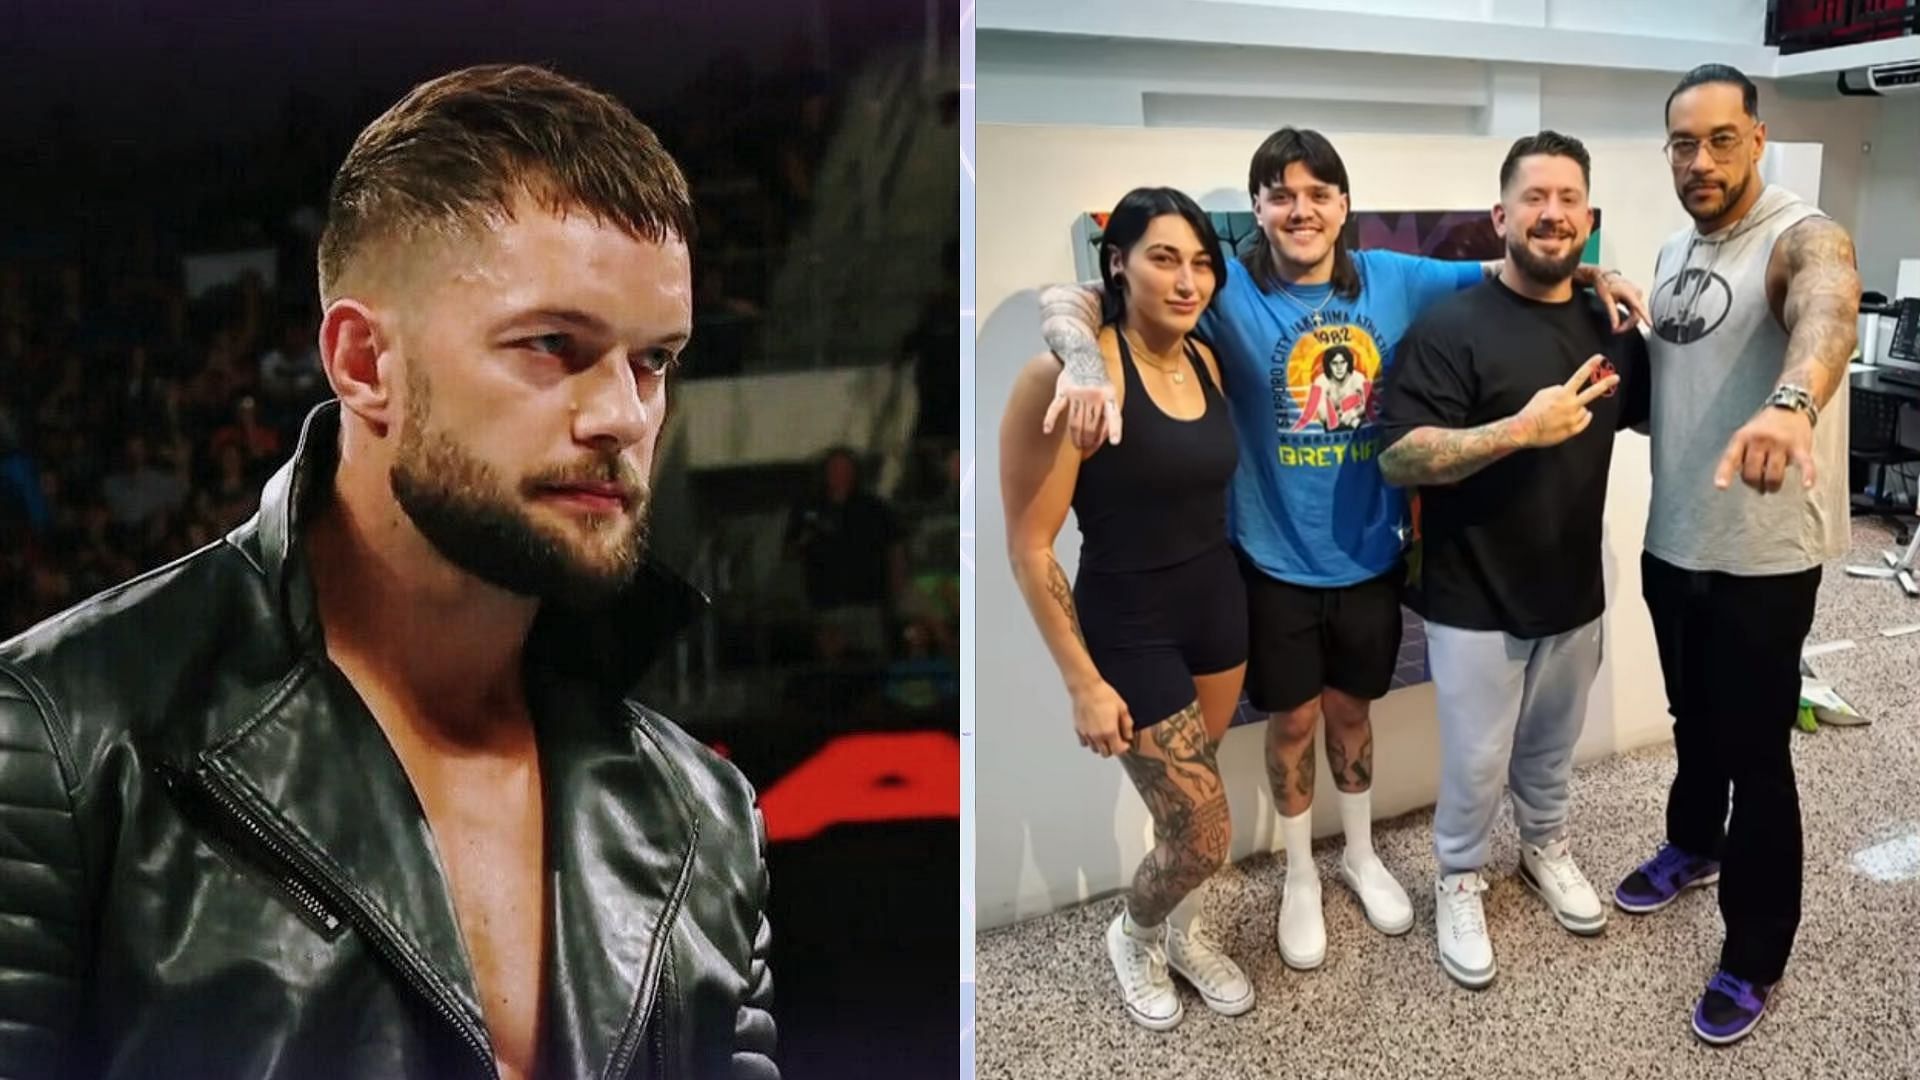 Finn Balor on the left, rest of The Judgment Day teammates on the right